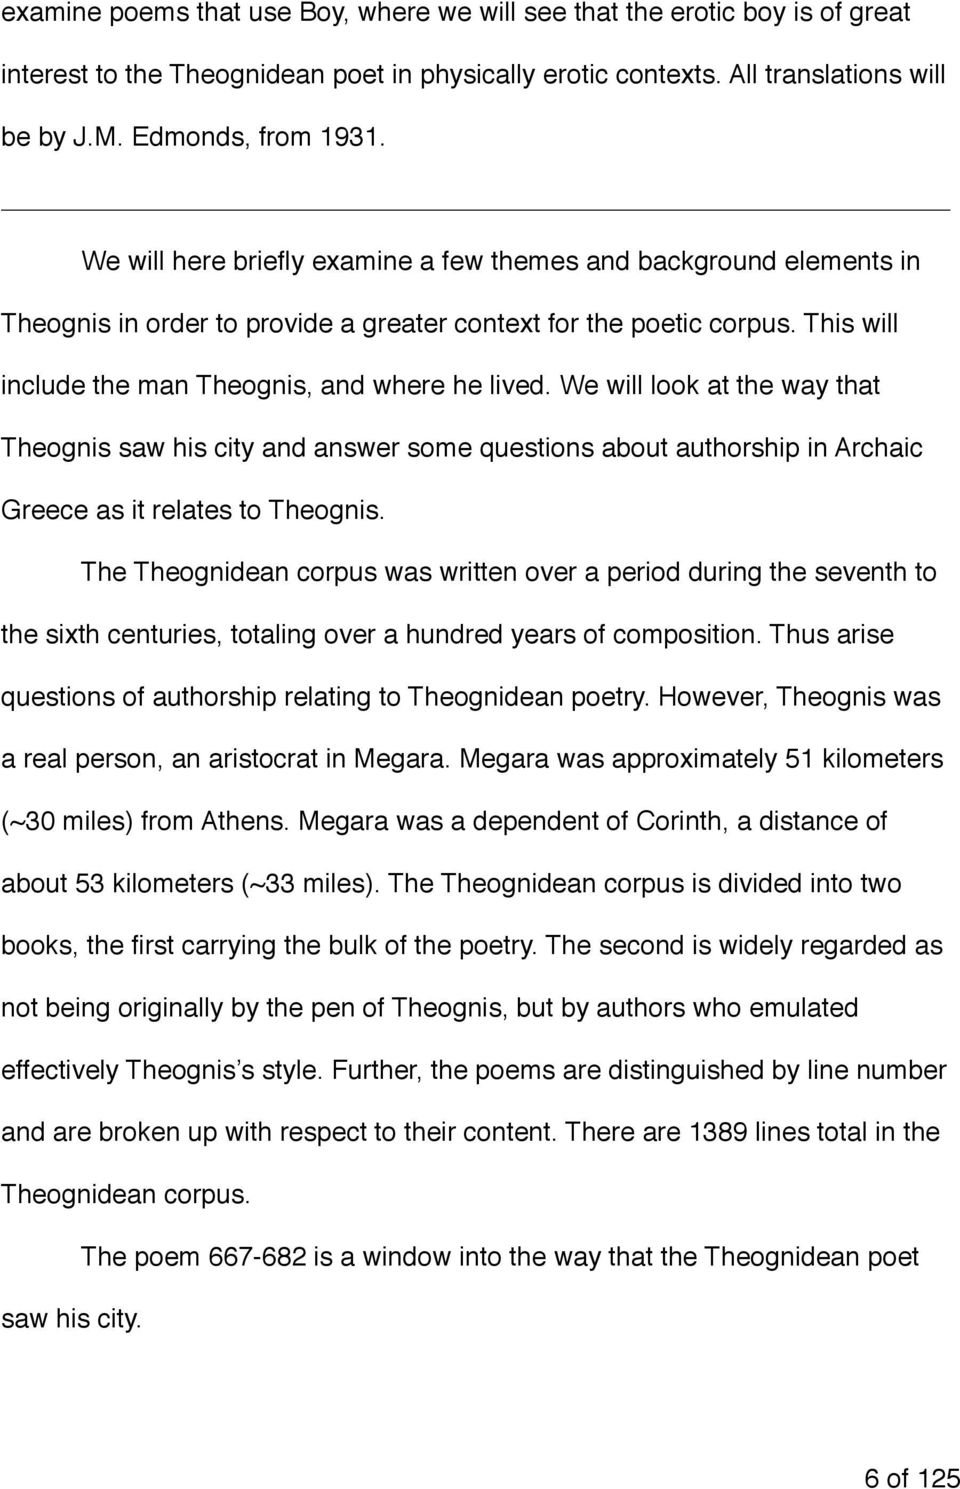 We will look at the way that Theognis saw his city and answer some questions about authorship in Archaic Greece as it relates to Theognis.